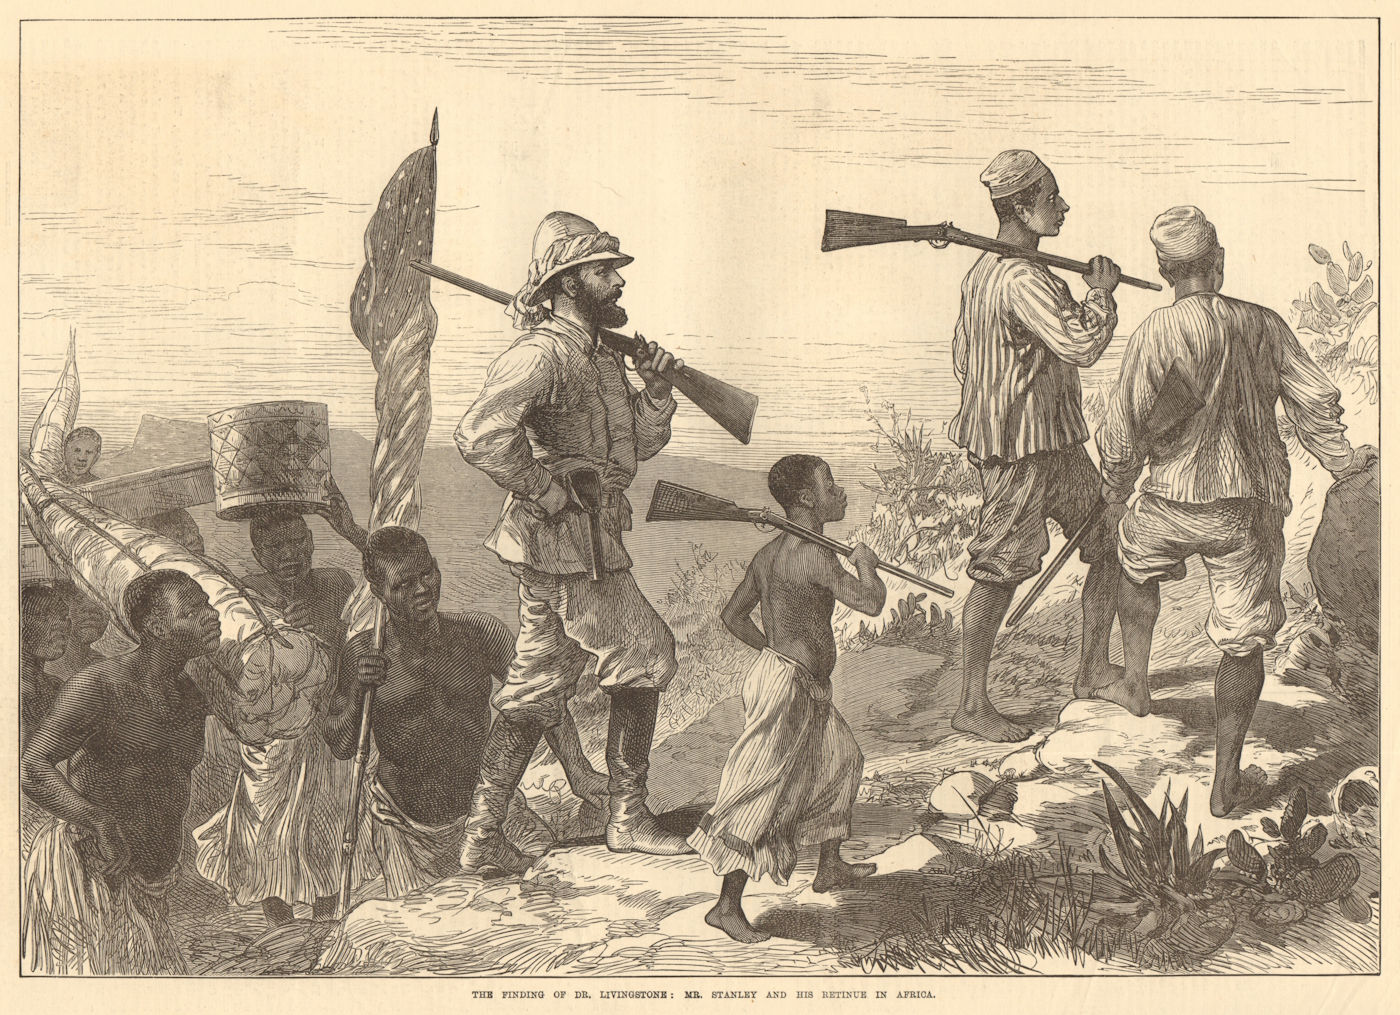 Associate Product Finding Dr. Livingstone: Mr Stanley & his retinue. Africa Explorers 1872